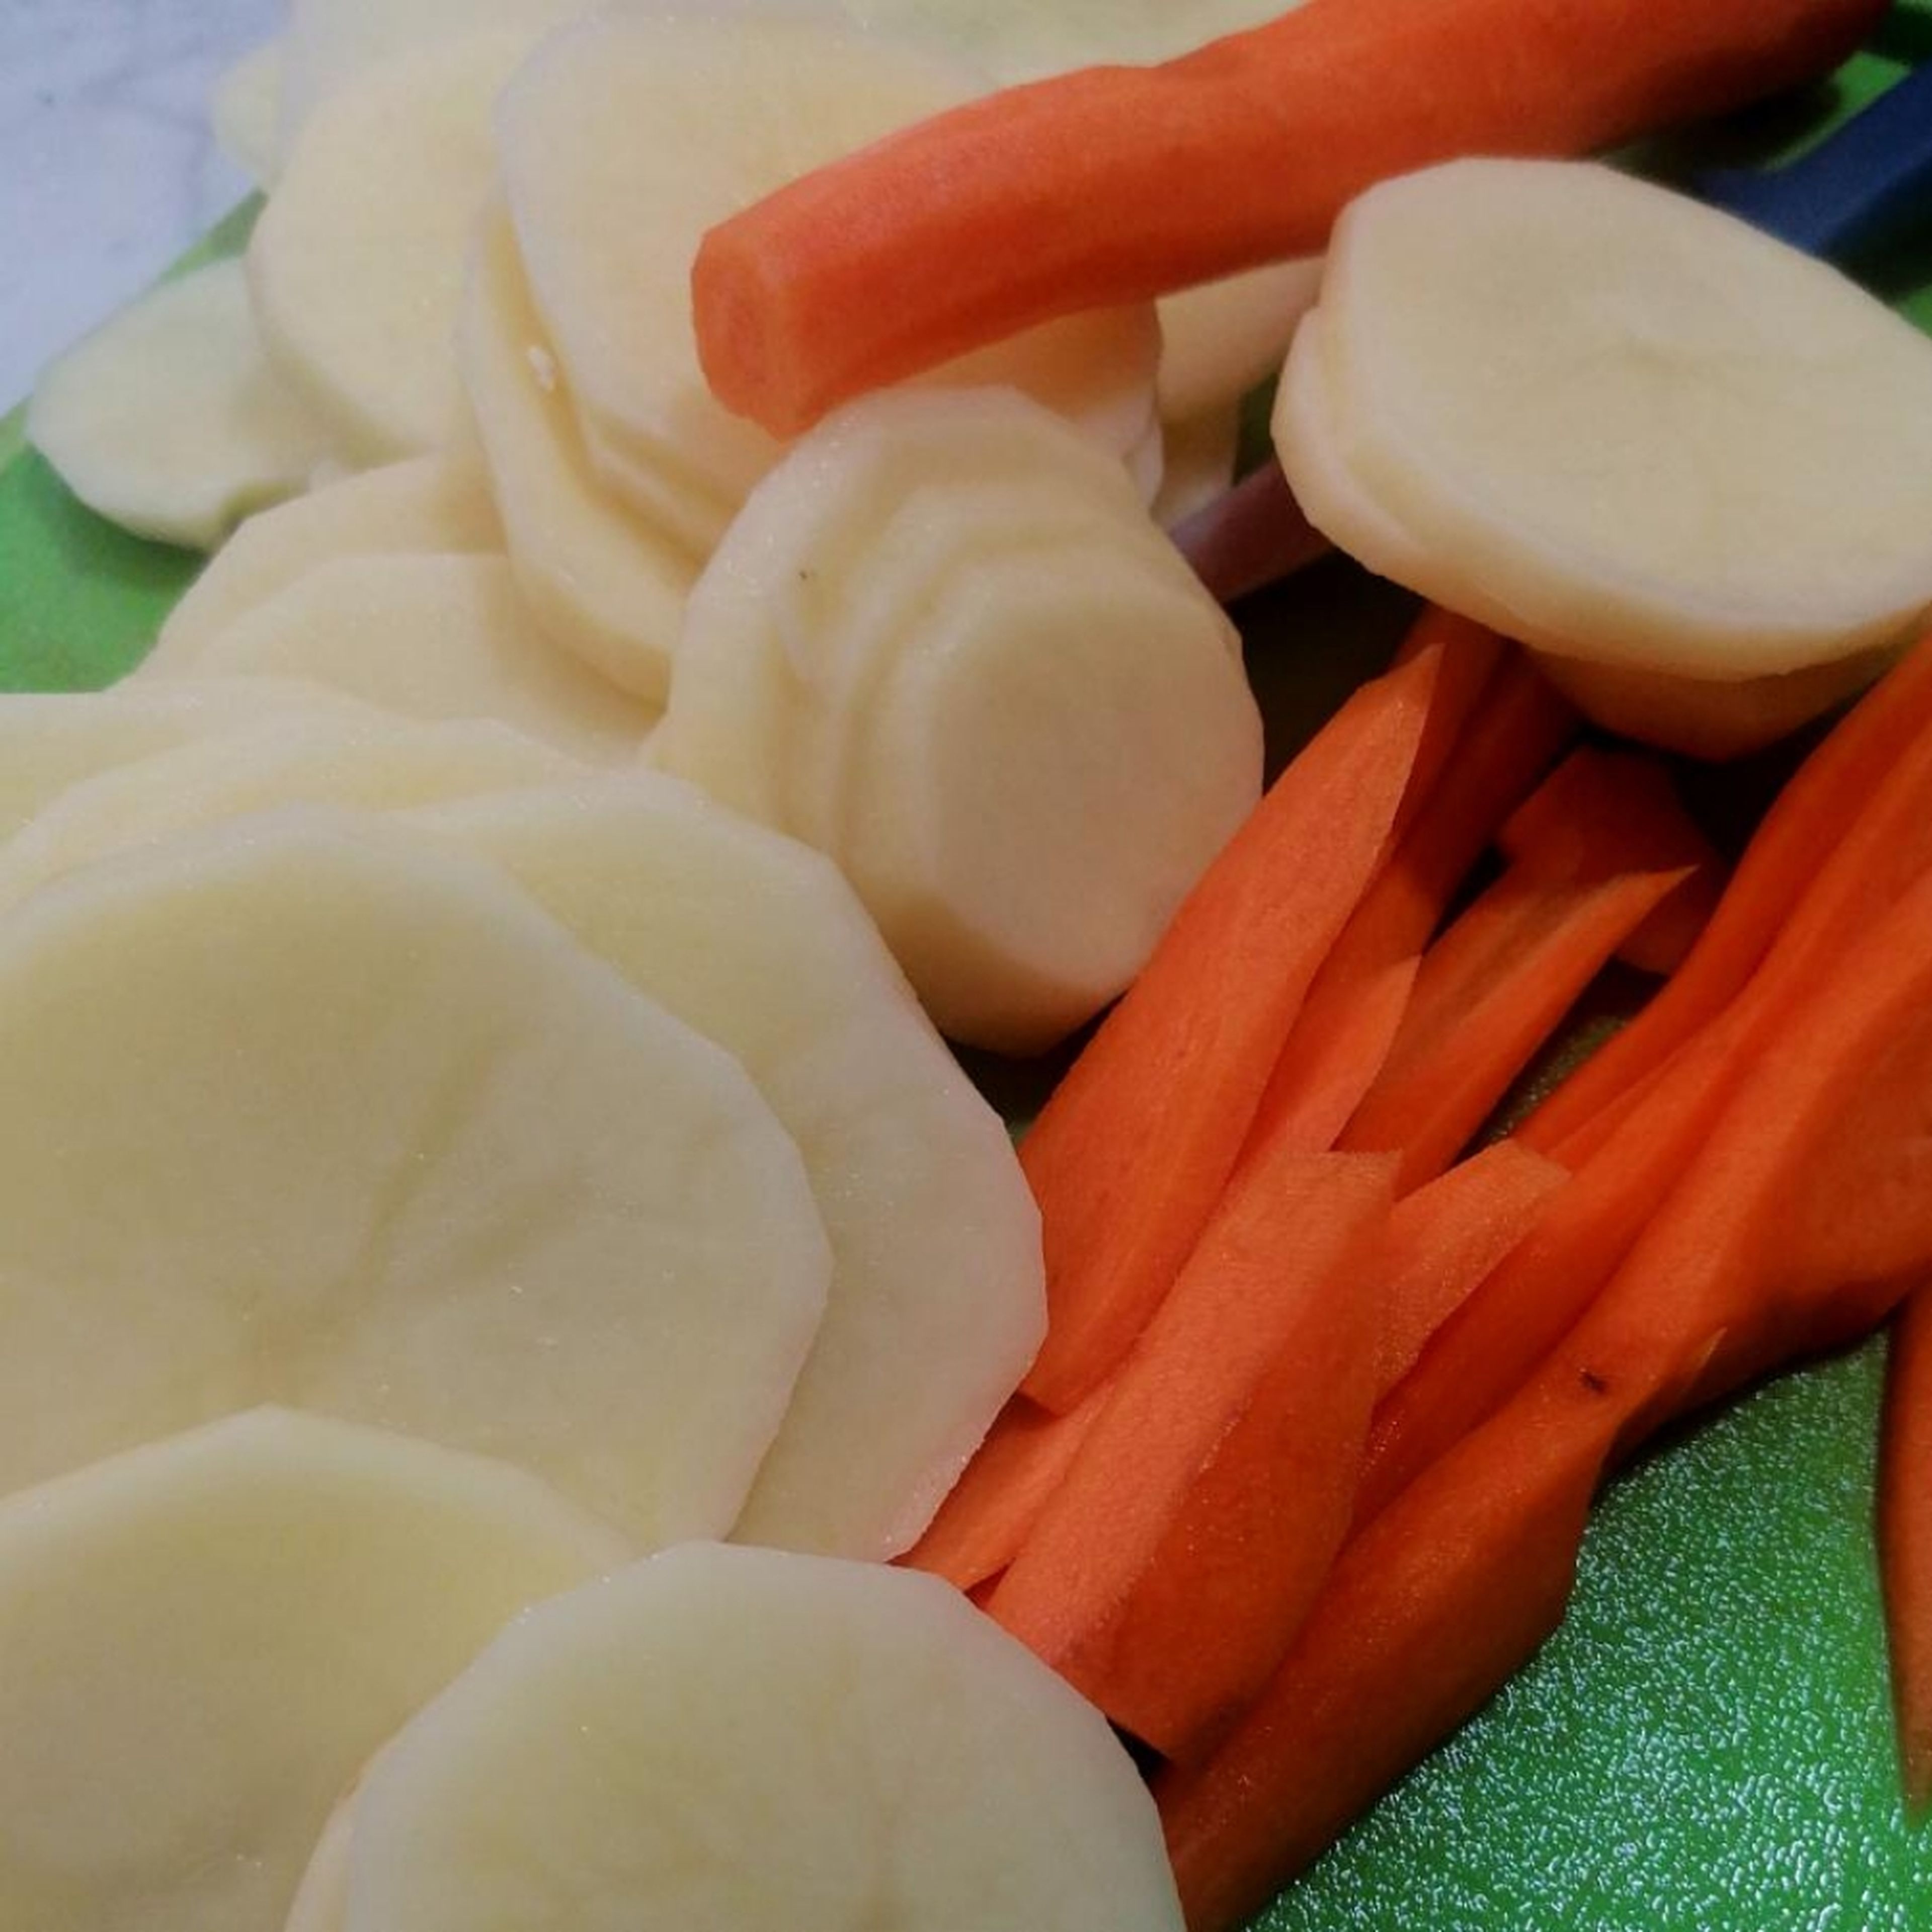 Cut the potatoes, carrots, tomato, bell pepper and onion into fine slices.